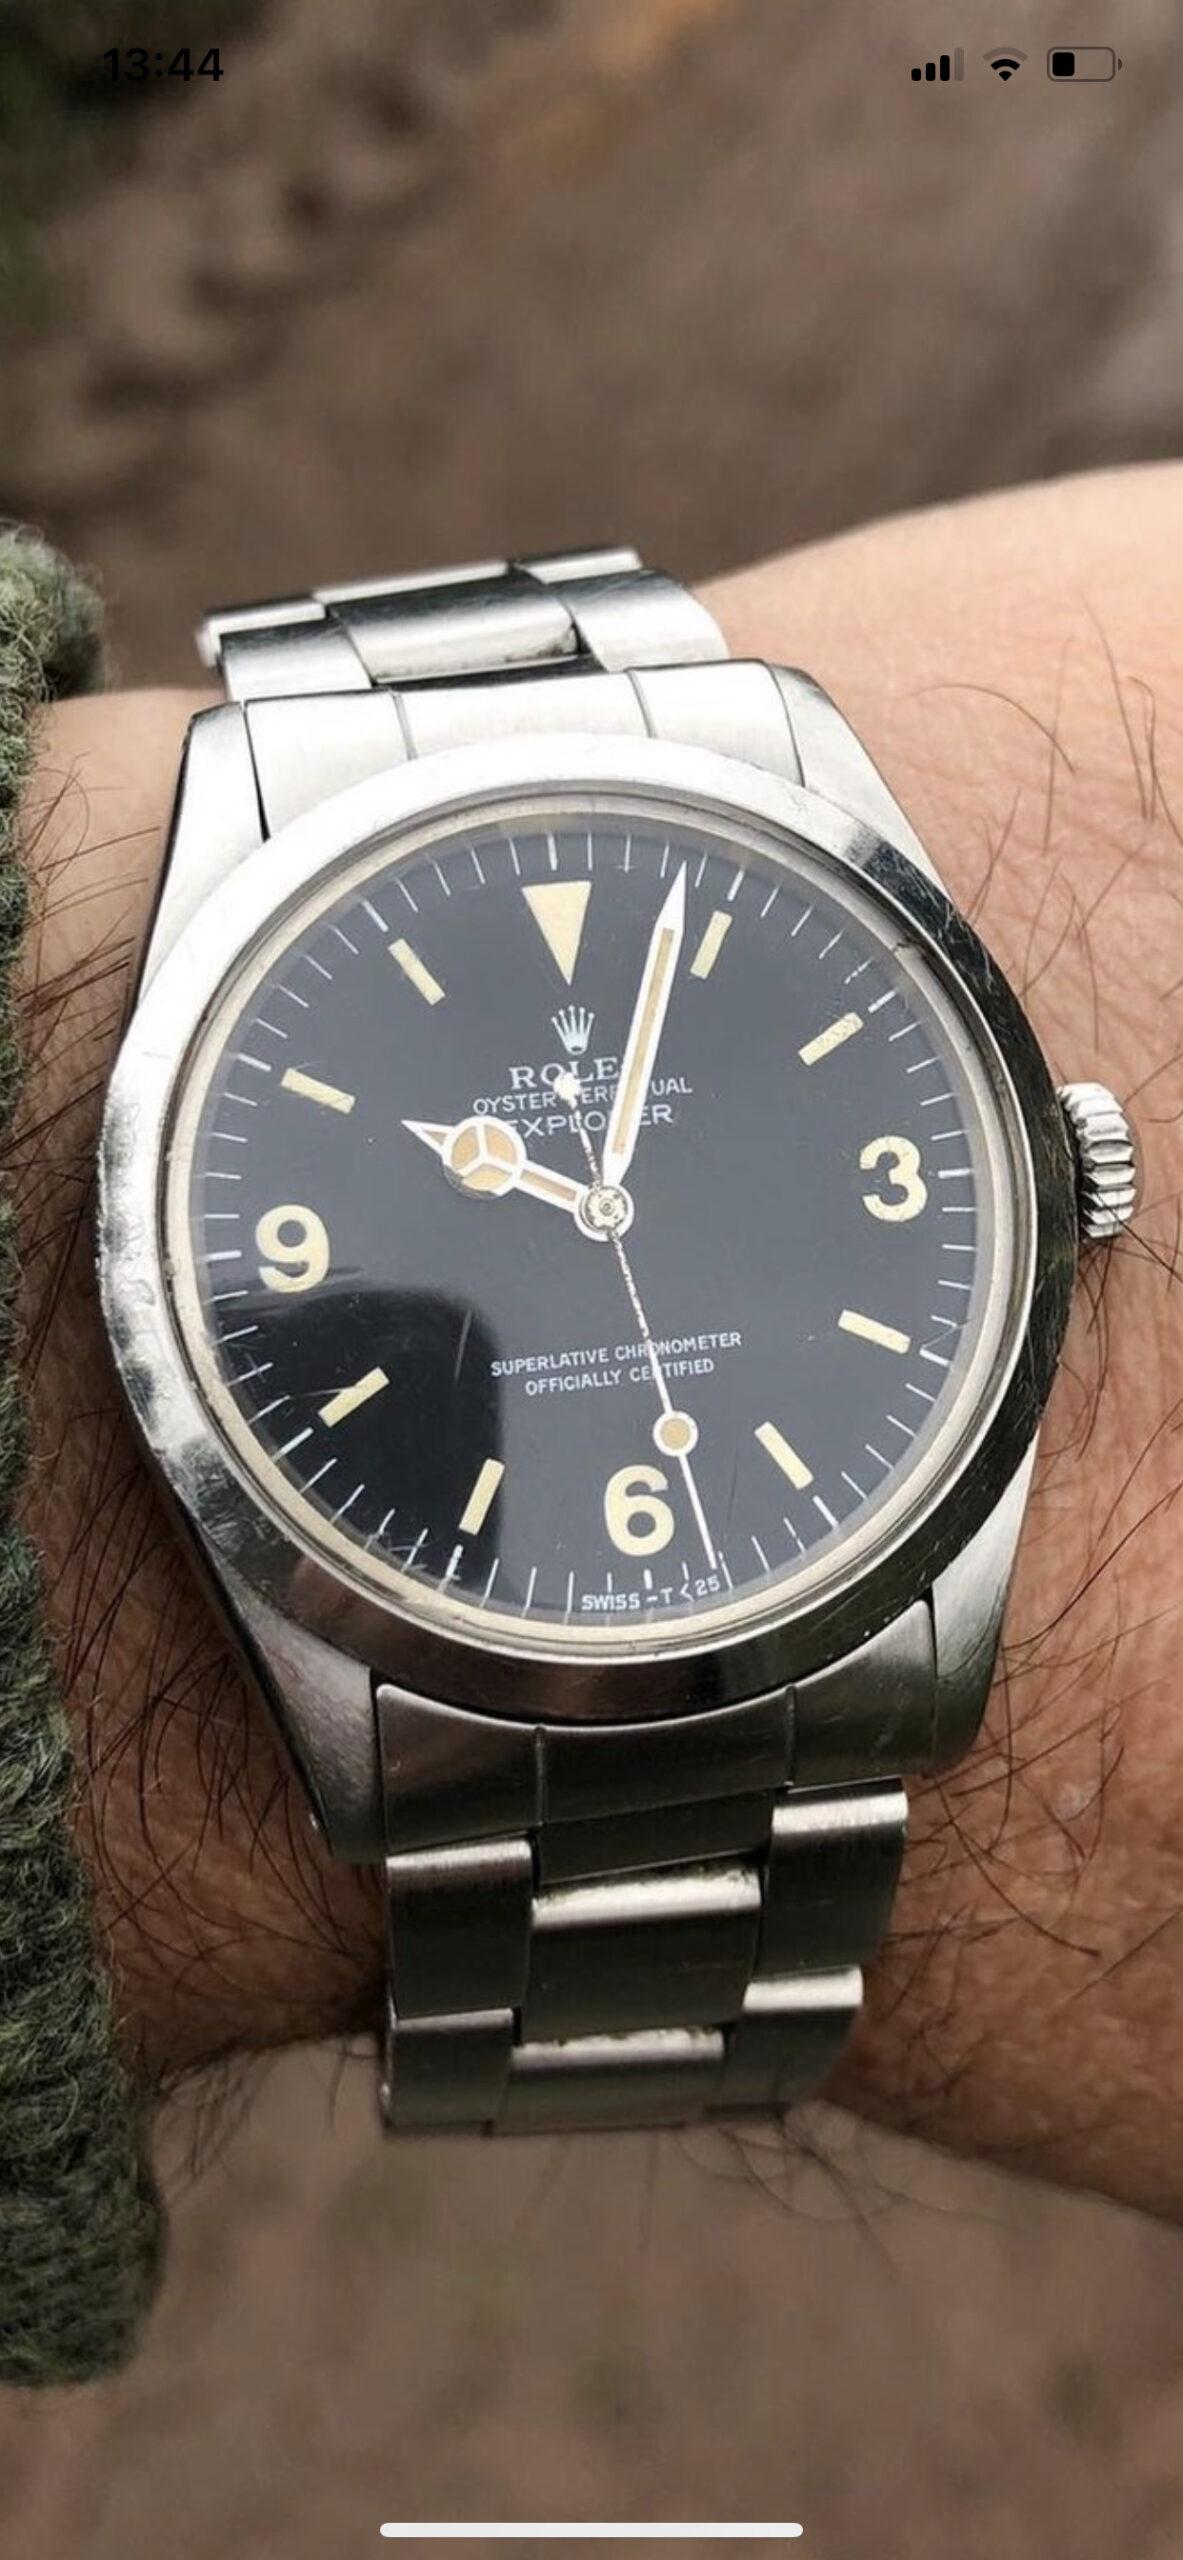 1982 Explorer 1016 Perfect Mark 5 Dial in Excellent Condition Matching Year Oyster Bracelet - Watches